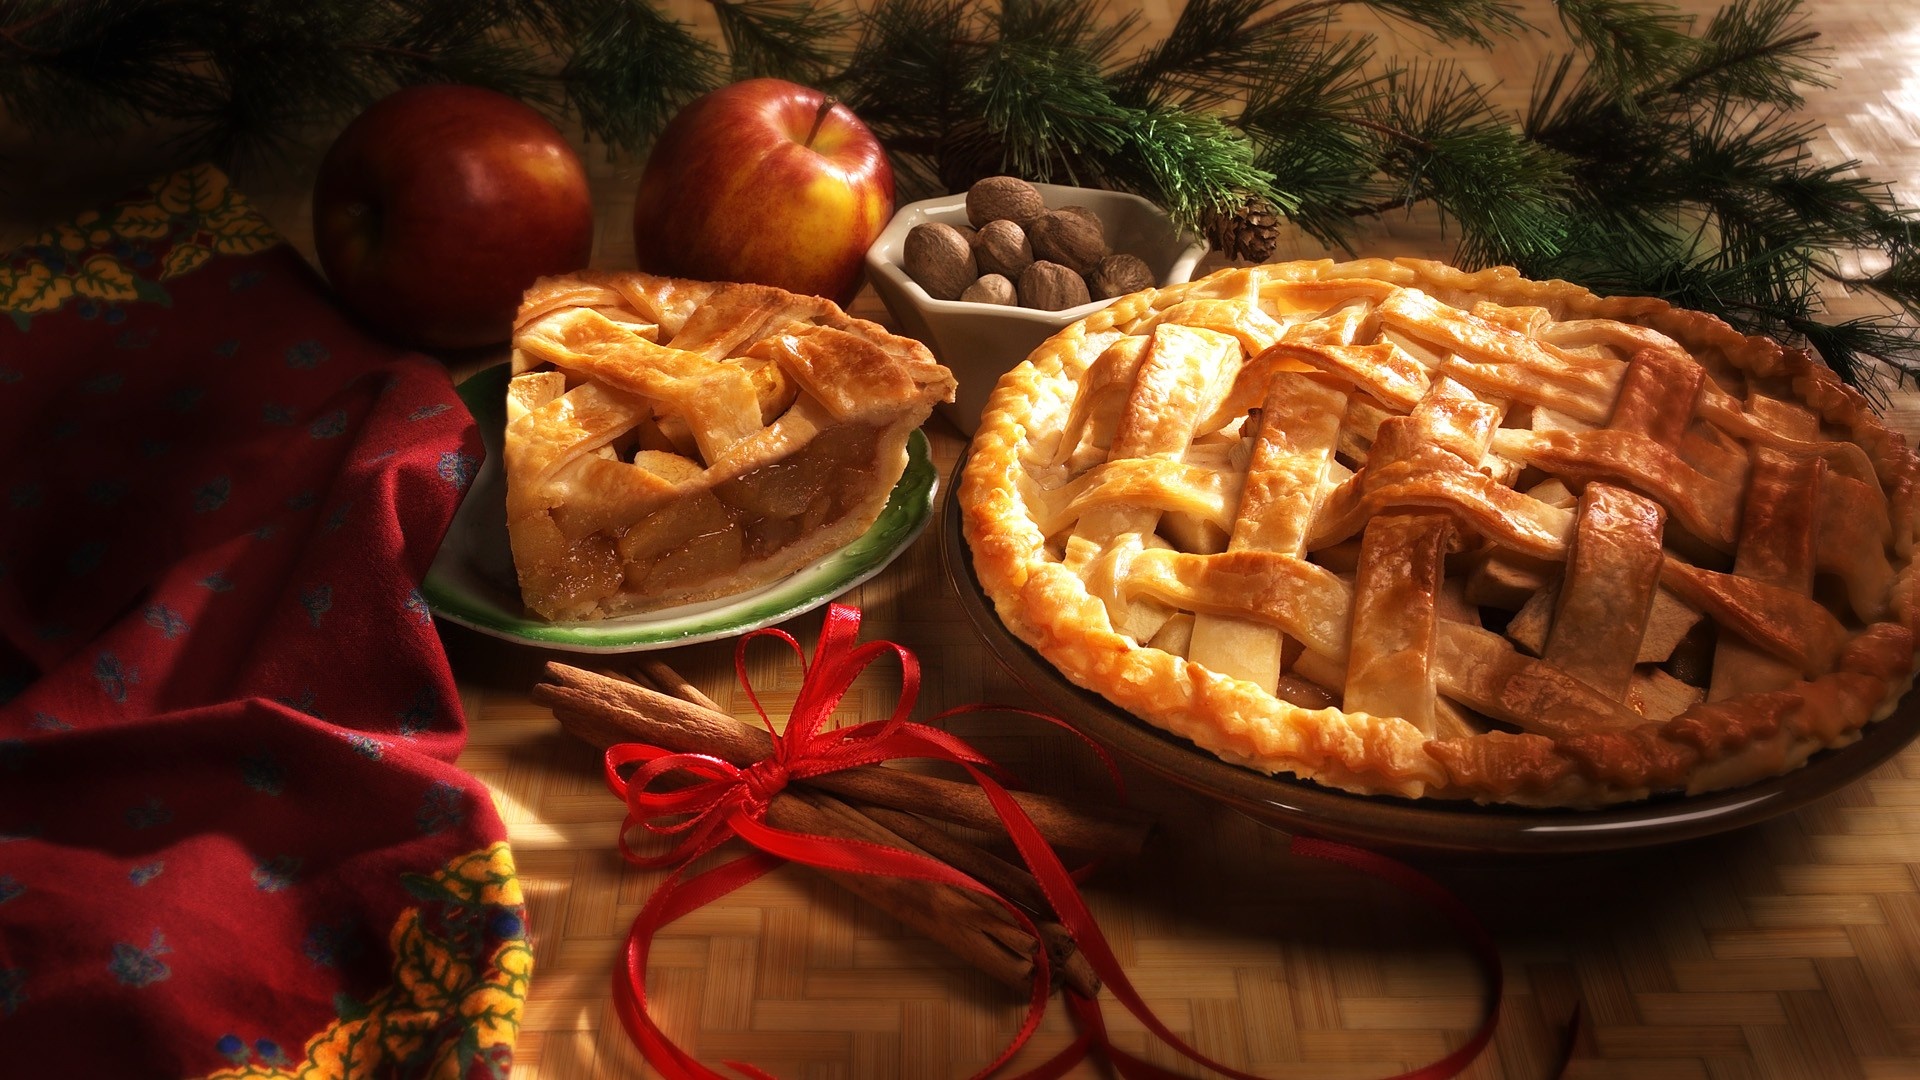 Pie: Popular in British cuisine and often feature a savory meat filling. 1920x1080 Full HD Background.